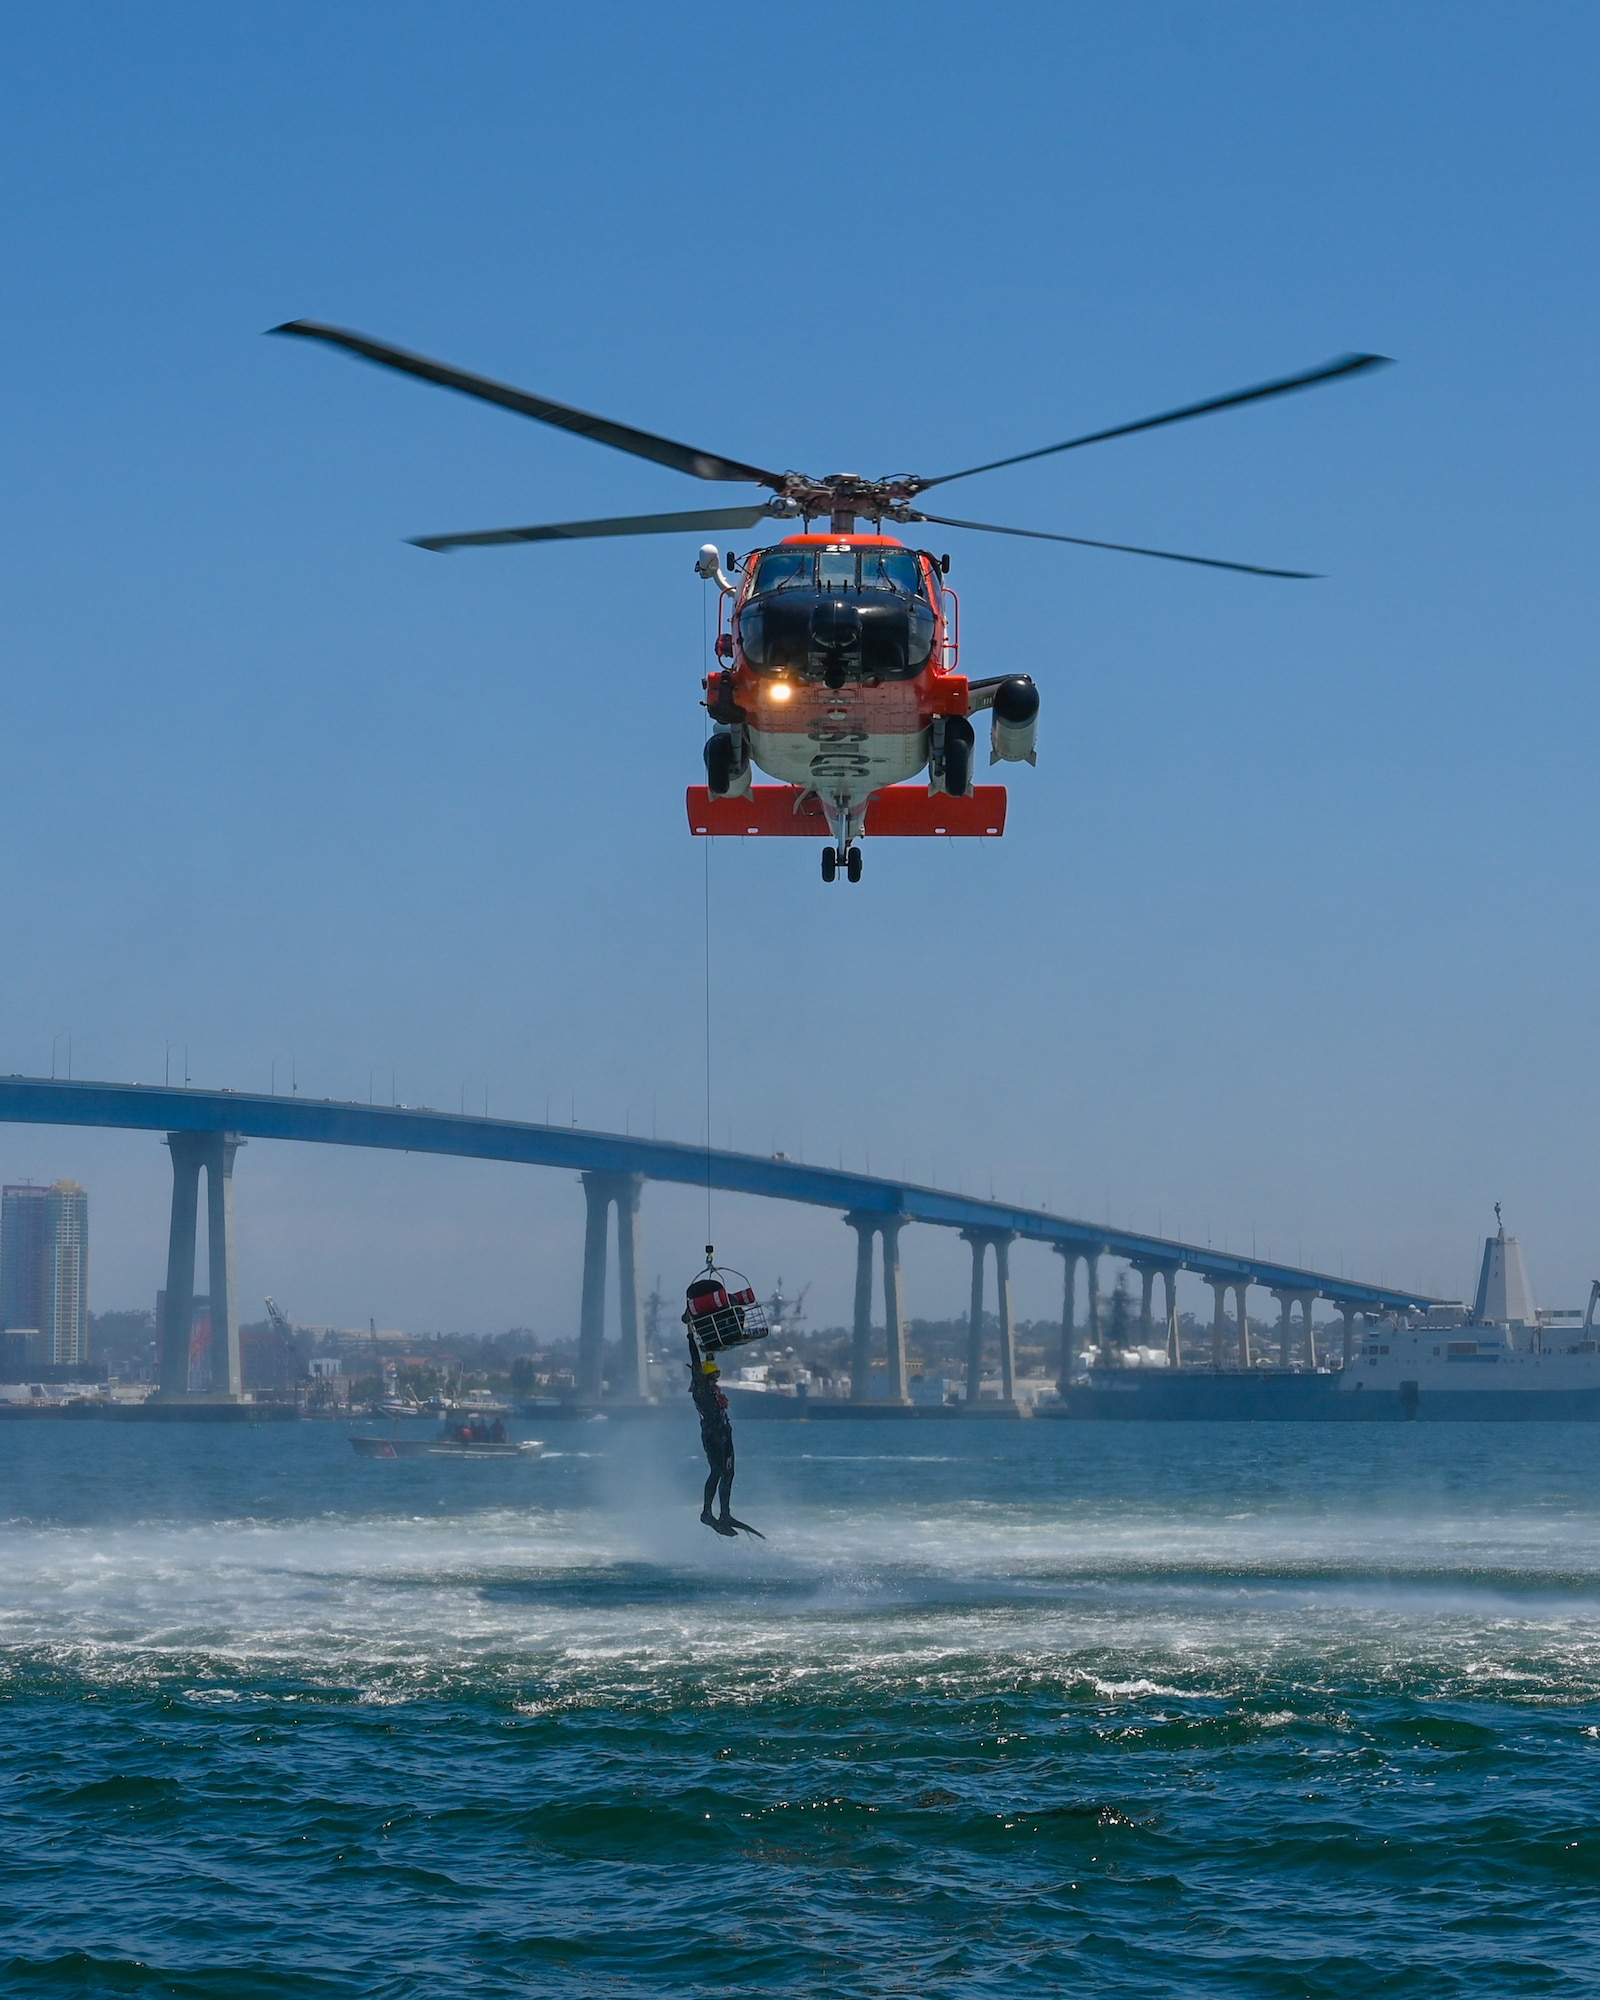 A U.S. Coast Guard MH-60J helicopter piloted by U.S. Coast Guard Lt. j.g. Tara Strauss hoists an Airmen out of the ocean while rescue swimmer Chief Petty Officer Tyler Holt prepares to drop back into the water at Naval Amphibious Air Base Coronado in San Diego, July 9. Pilots must complete water survival training every three years to maintain combat readiness.  (U.S. Air National Guard photo by Staff Sgt. Aubrey Pomares)